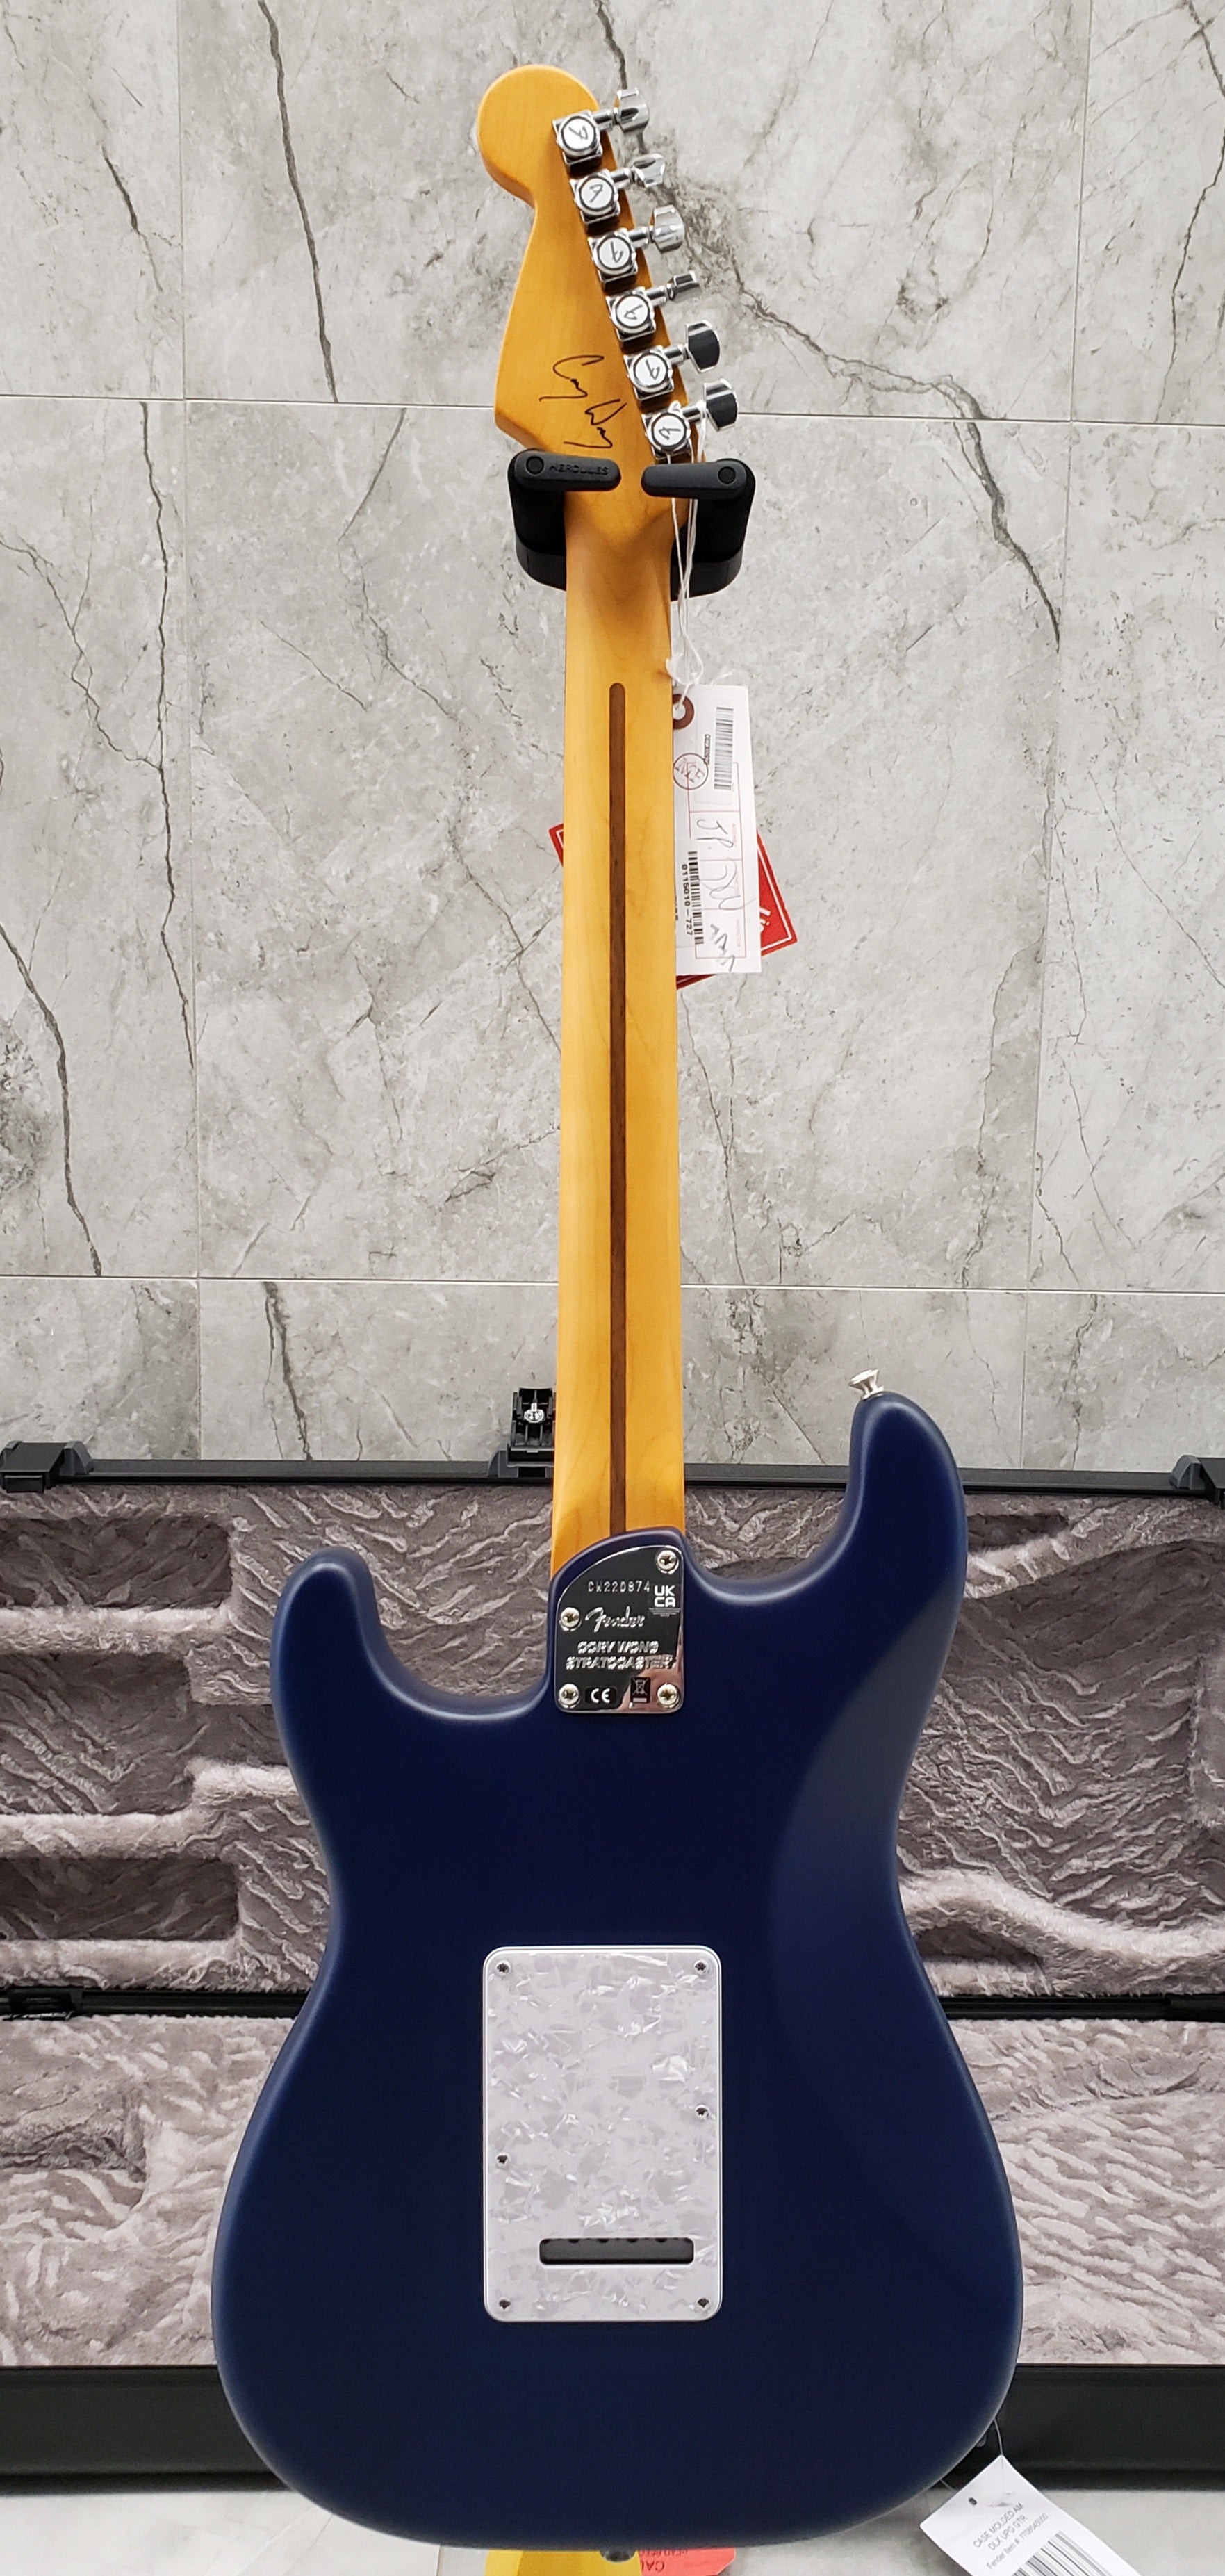 Fender Cory Wong Stratocaster Rosewood Fingerboard Sapphire Blue Transparent F-0115010727 SERIAL NUMBER CW220874 - 7.6 LBS